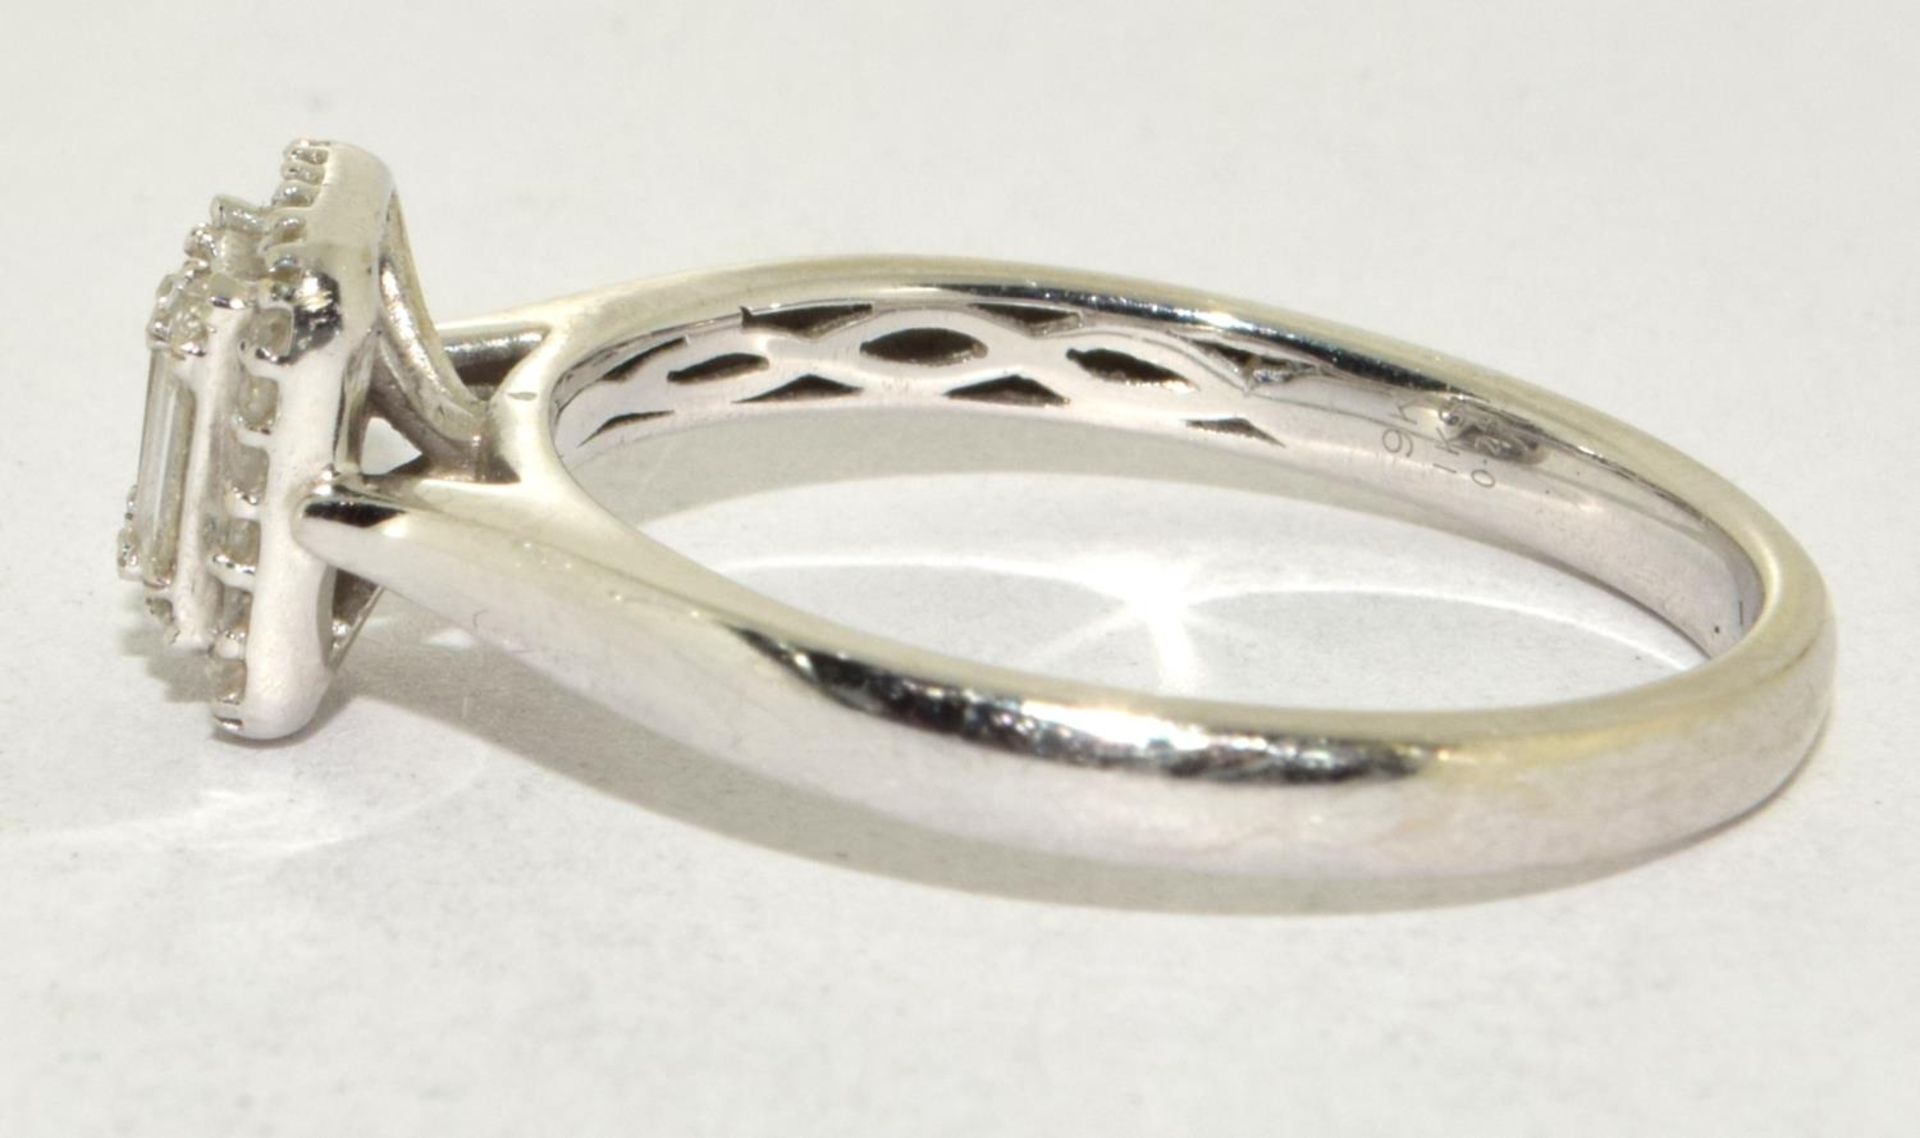 9ct white gold ladies Diamond halo ring hallmarked in ring as 1ct center and 0.25ct outer size R - Image 2 of 5